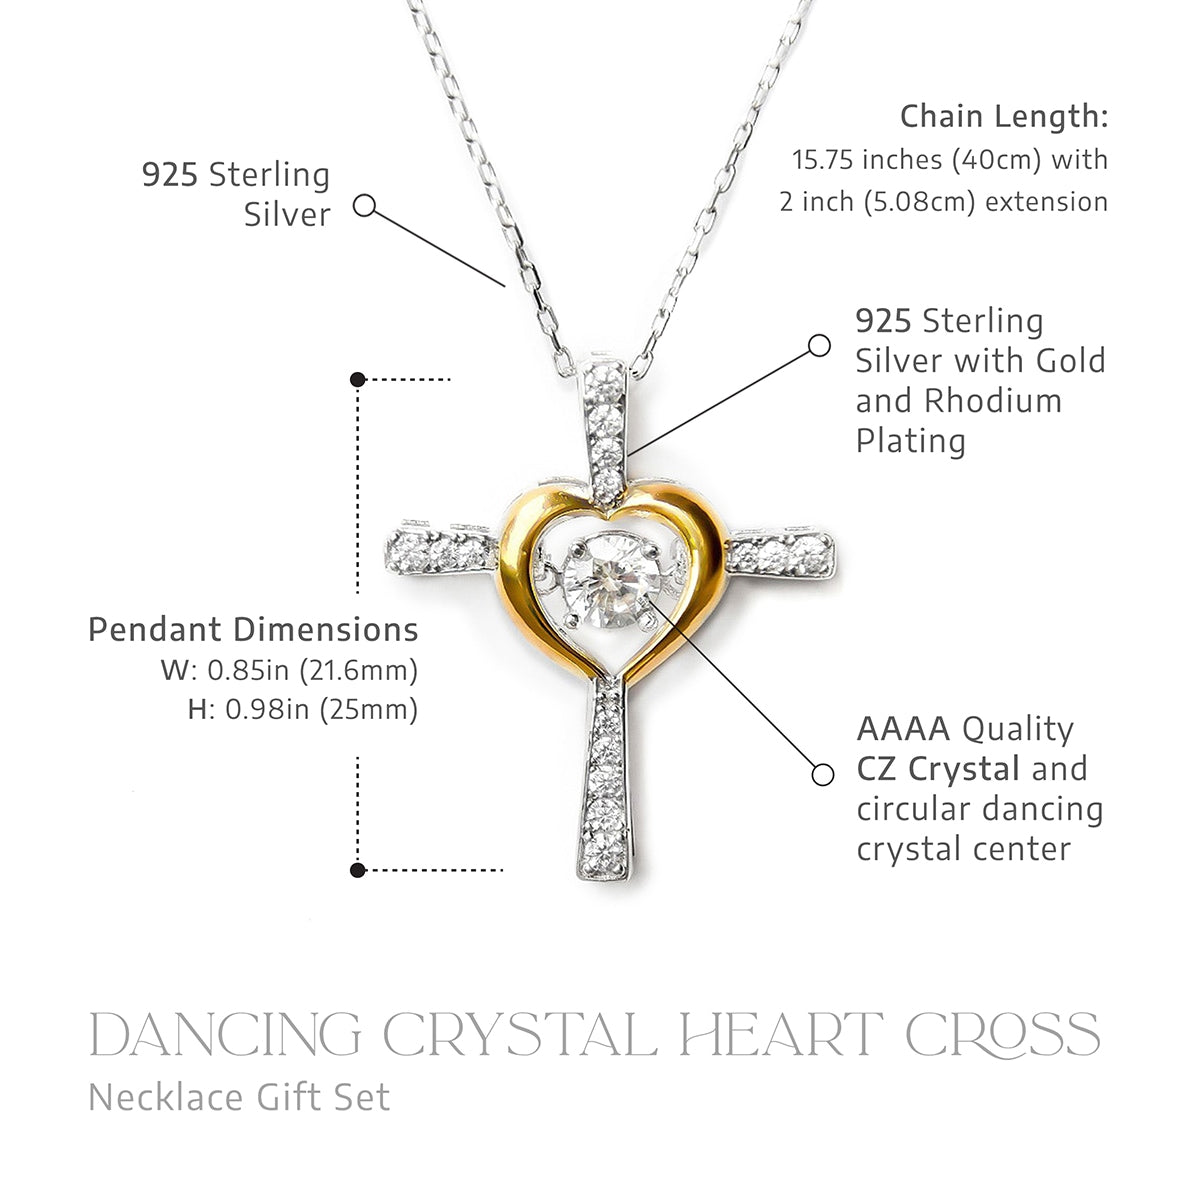 To My Wife, With You By My Side - Dancing Crystal Heart Cross Necklace Gift Set